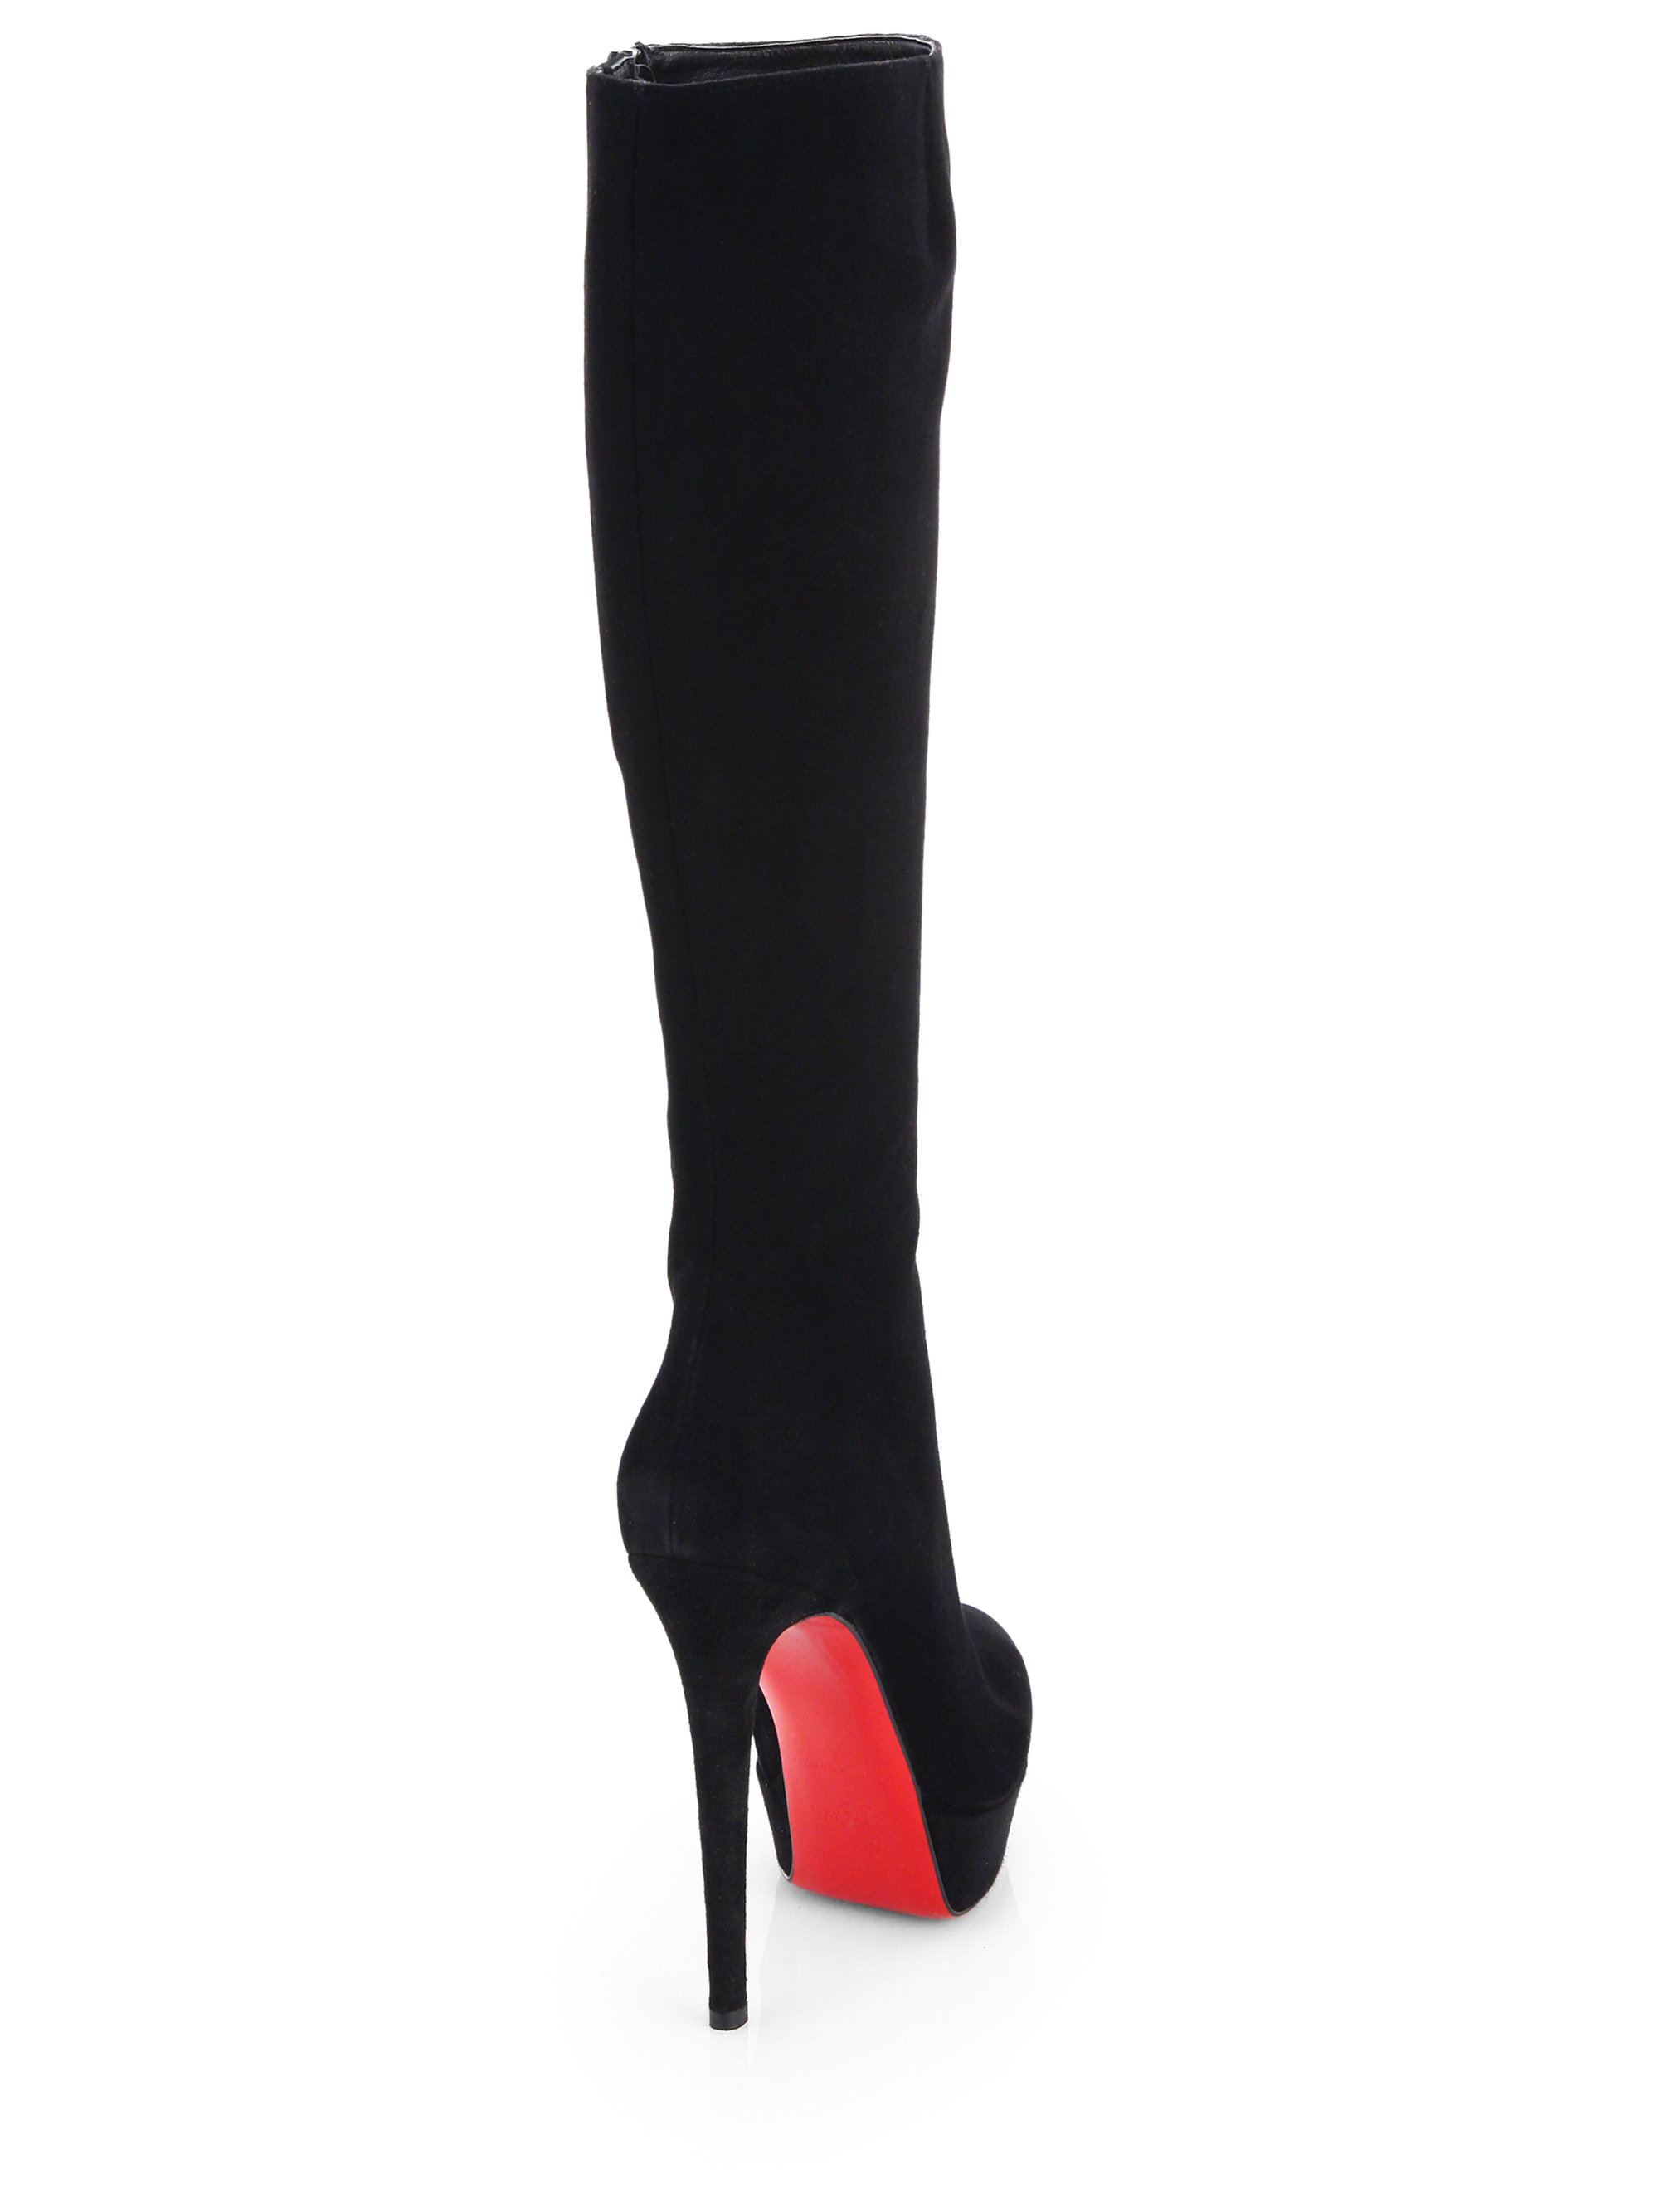 Christian Louboutin Bianca Suede Knee High Boots In Black Lyst